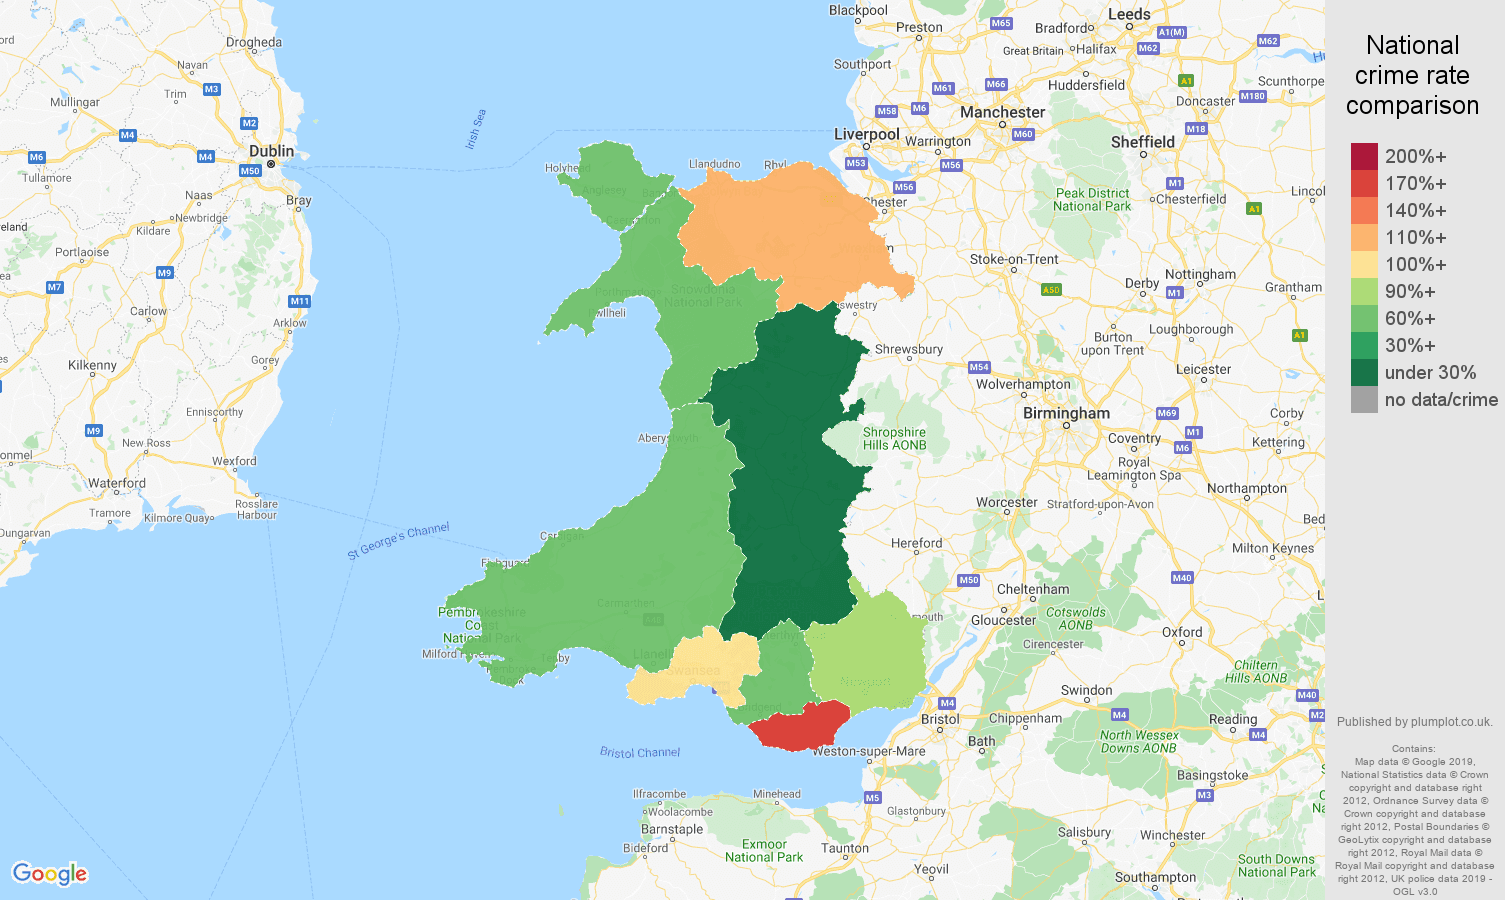 Wales shoplifting crime rate comparison map